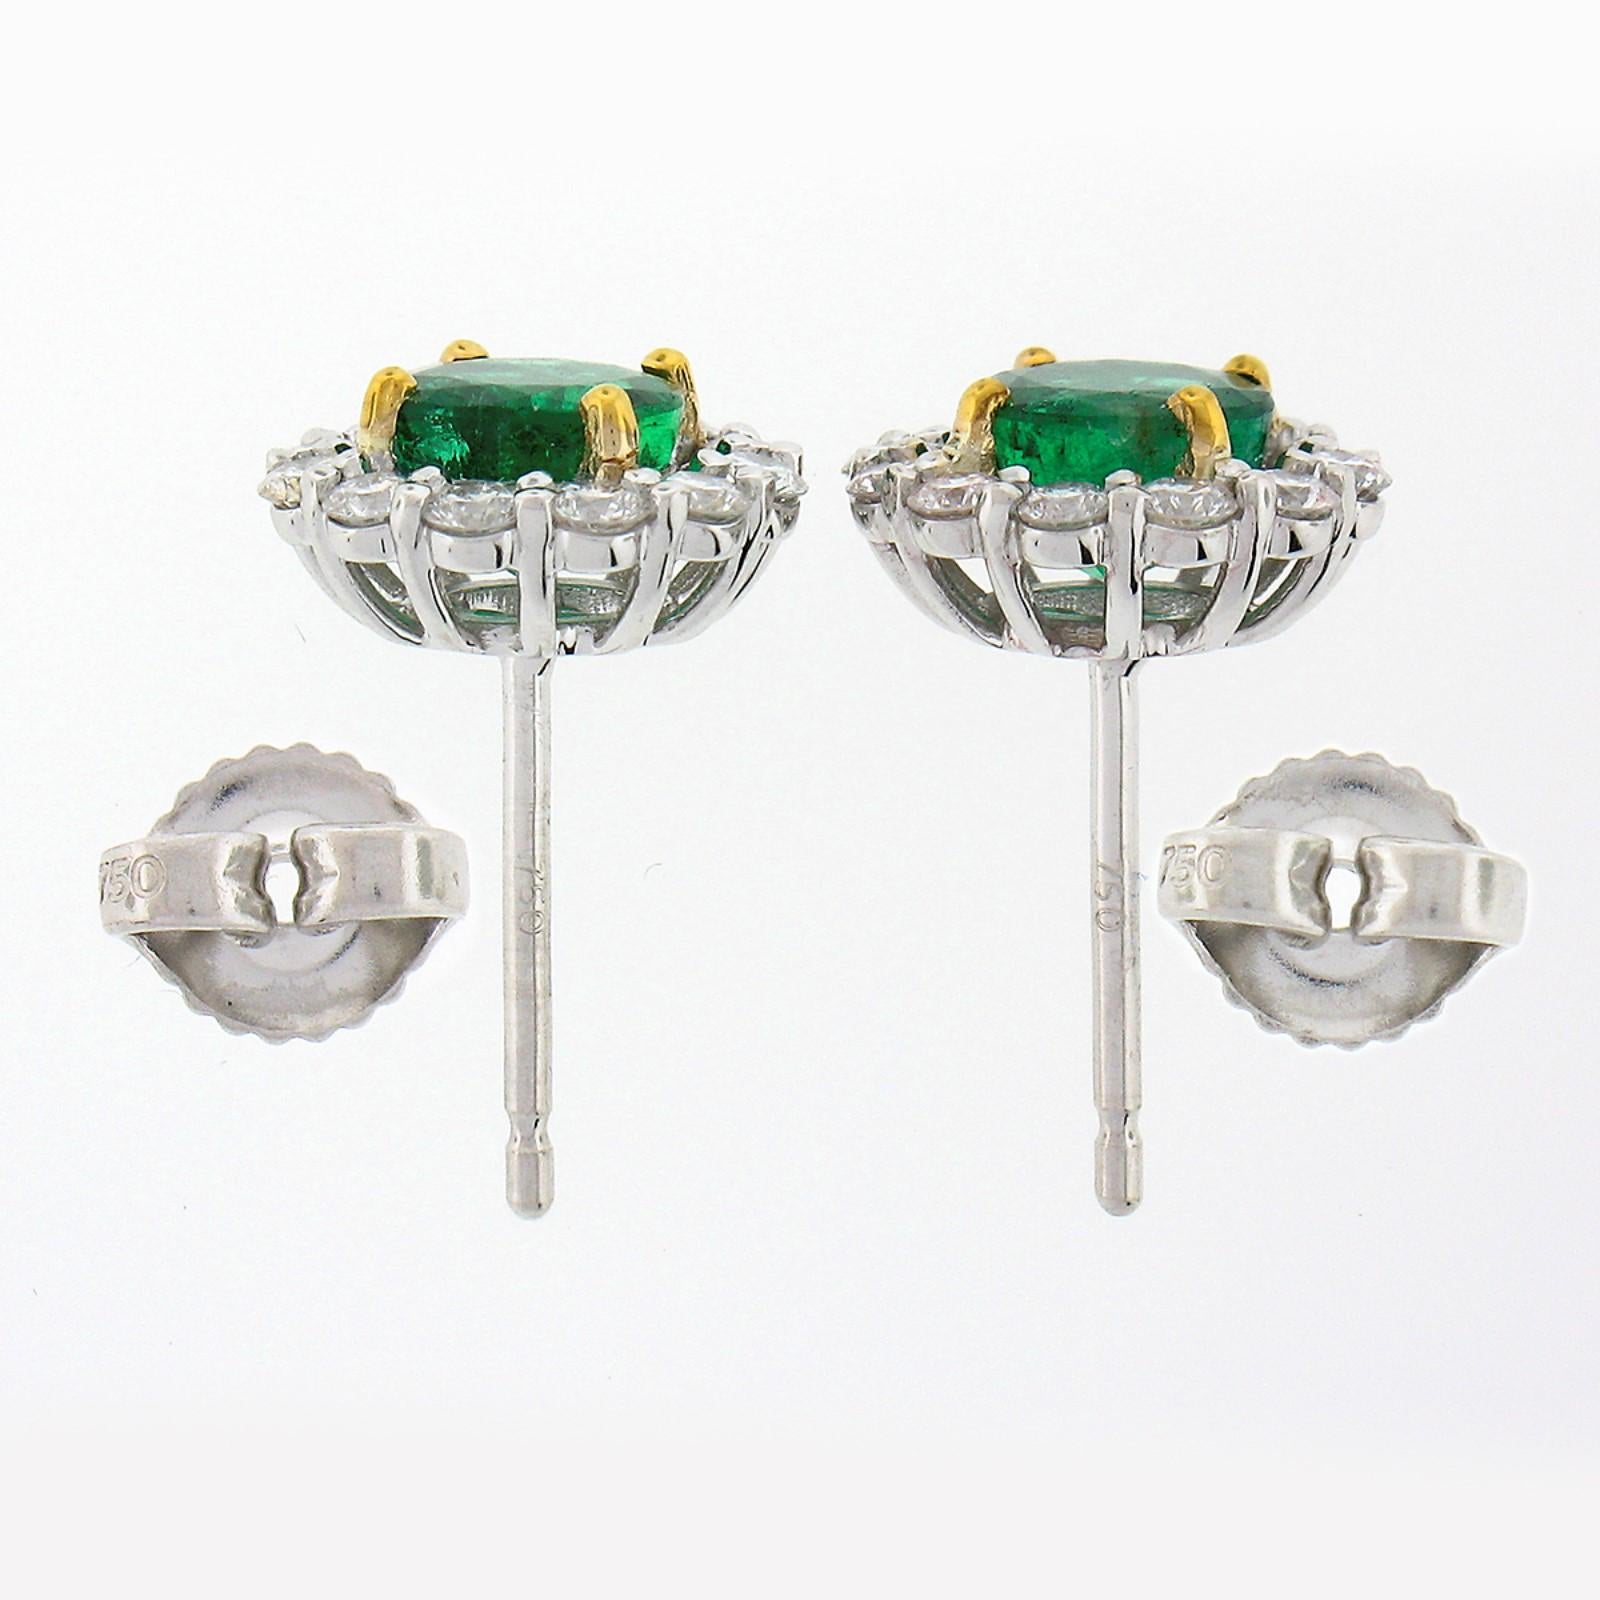 New 18k TT Gold 2.40ctw Round Brilliant Emerald W/ Diamond Halo Stud Earrings In New Condition For Sale In Montclair, NJ